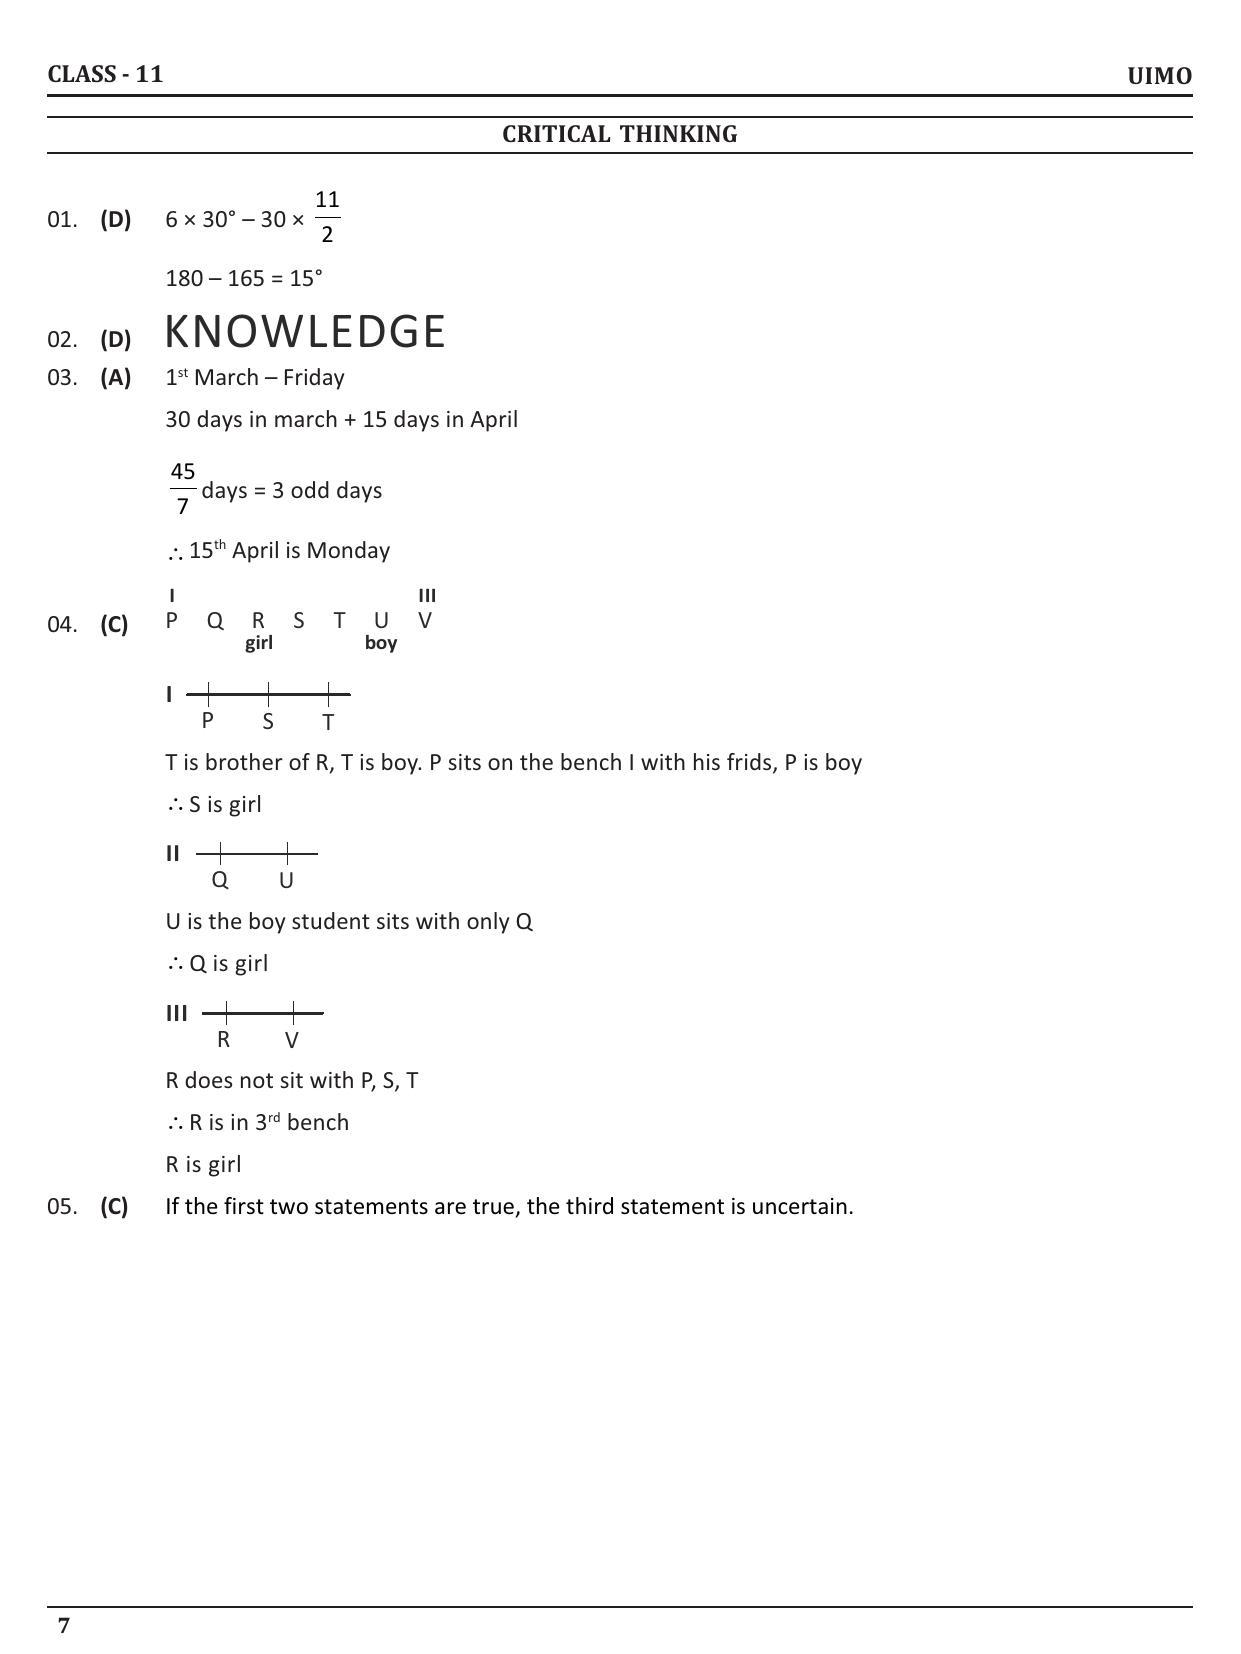 UIMO Class 11 2023 Sample Paper - Page 7